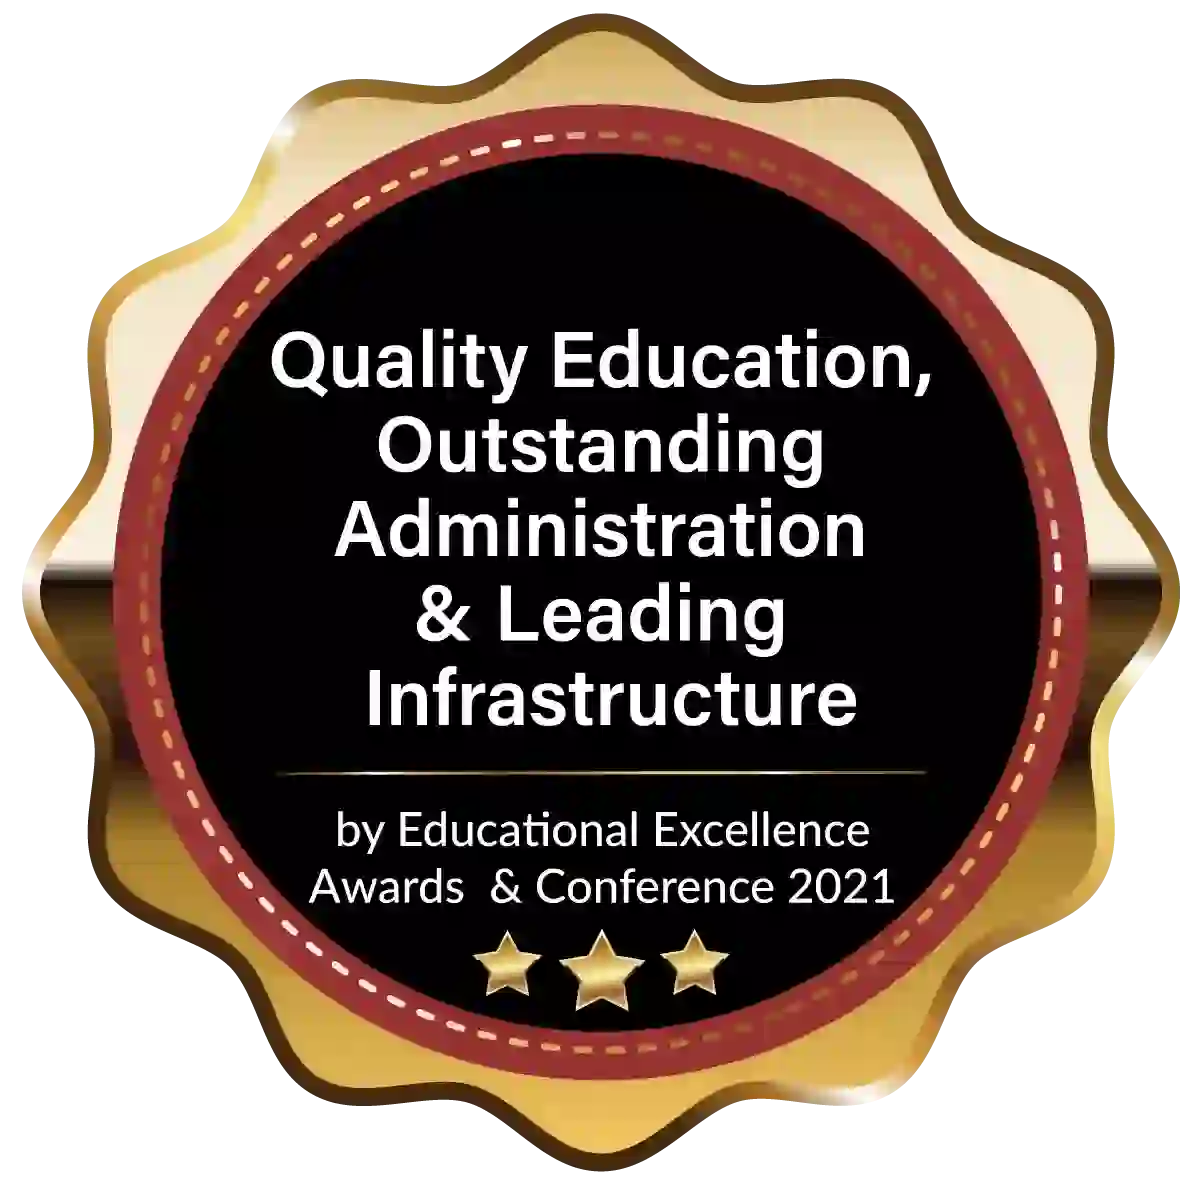 Quality Education, Outstanding Administration & Leading Infrastructure